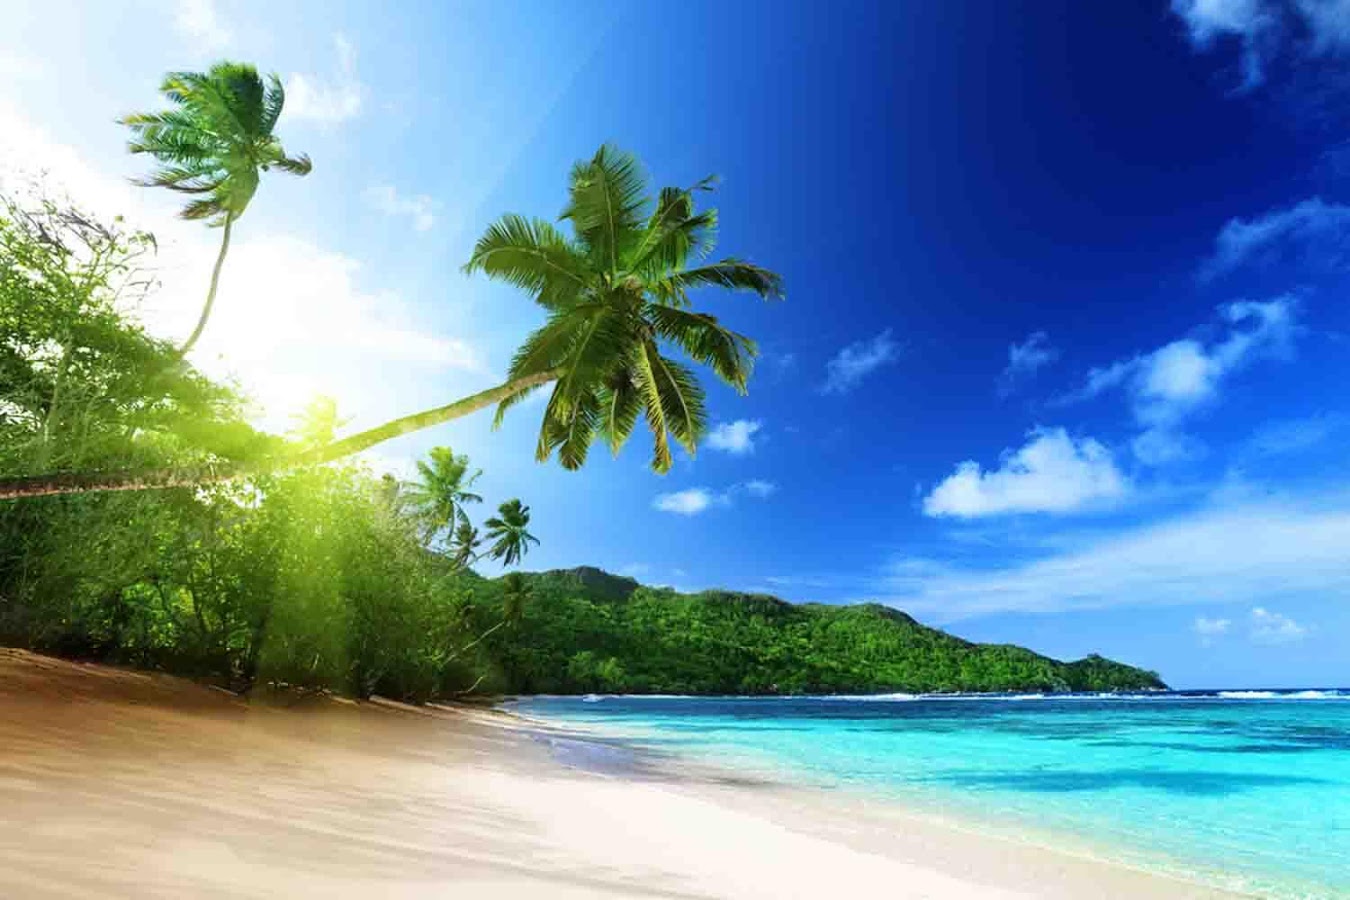 Tropical Island Wallpaper - Android Apps on Google Play